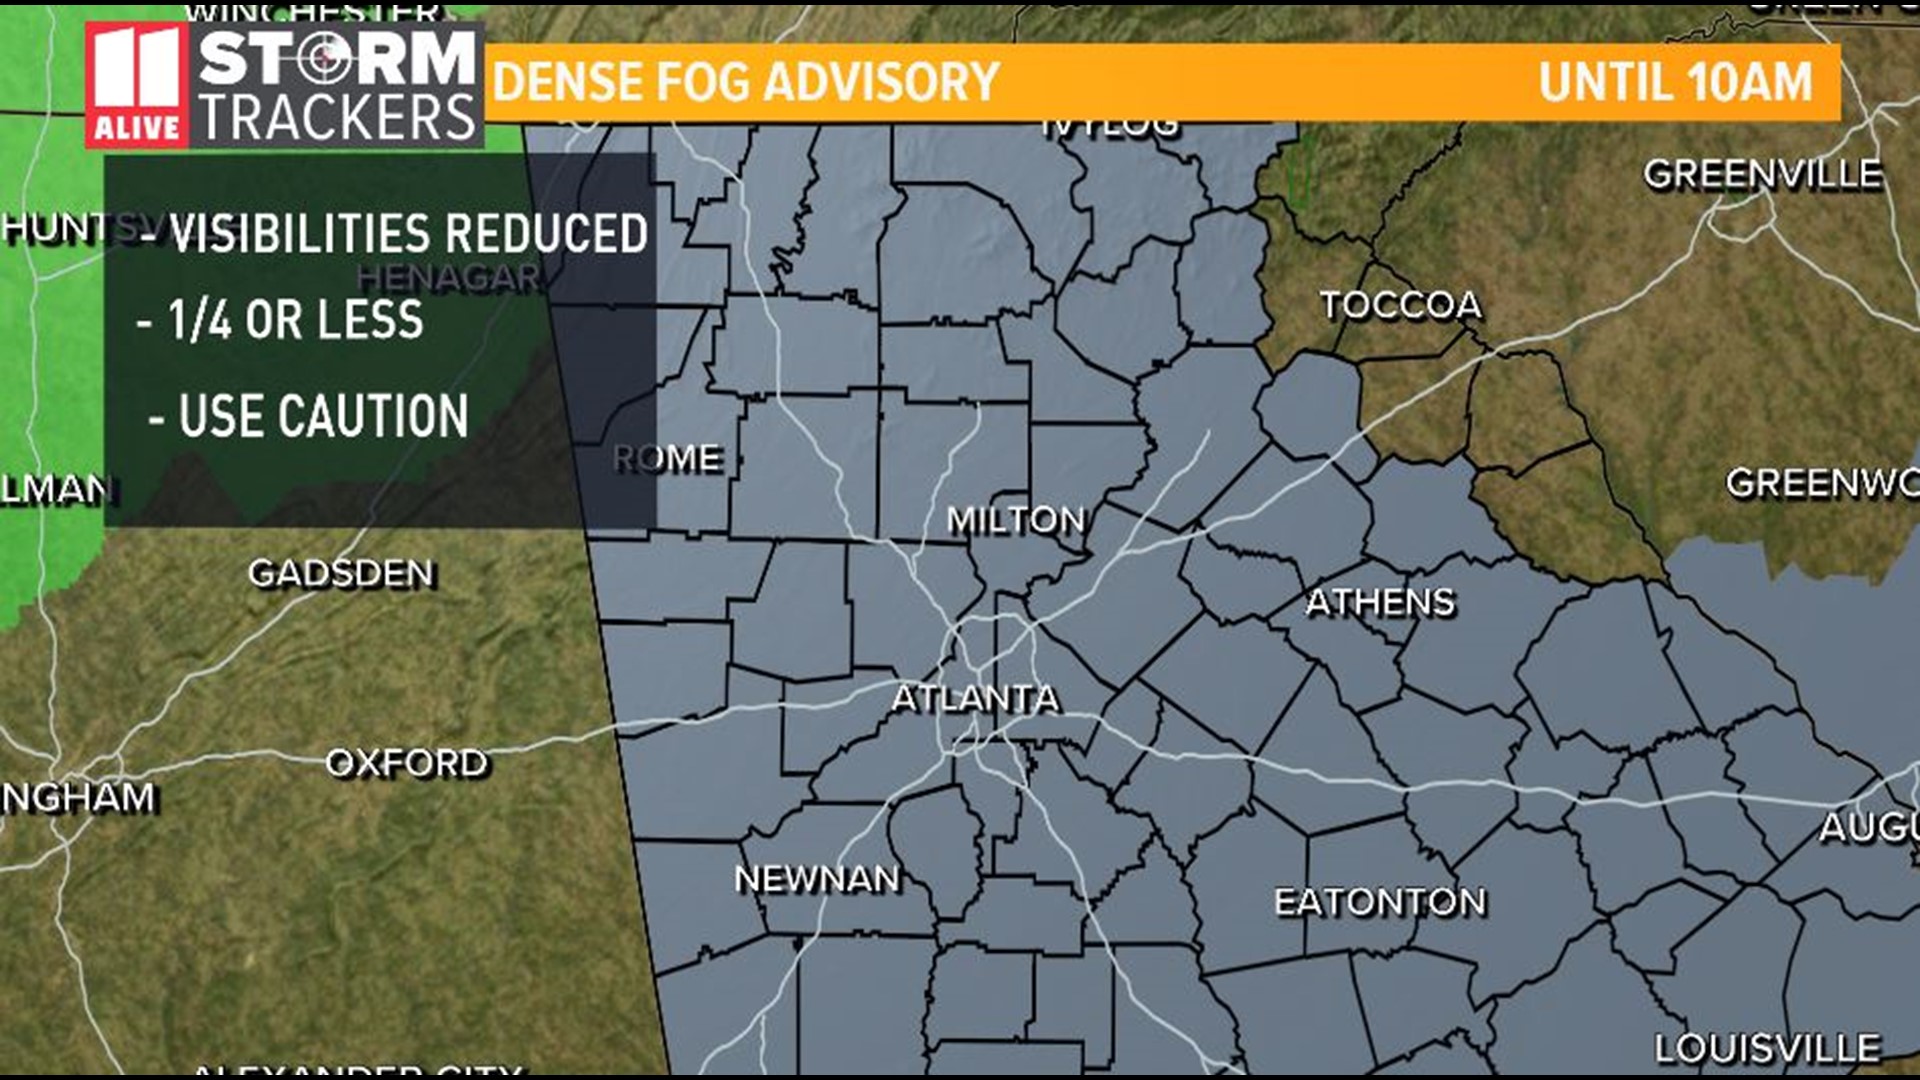 Dense Fog Advisory in effect this morning and Flood Watch continues through tonight.